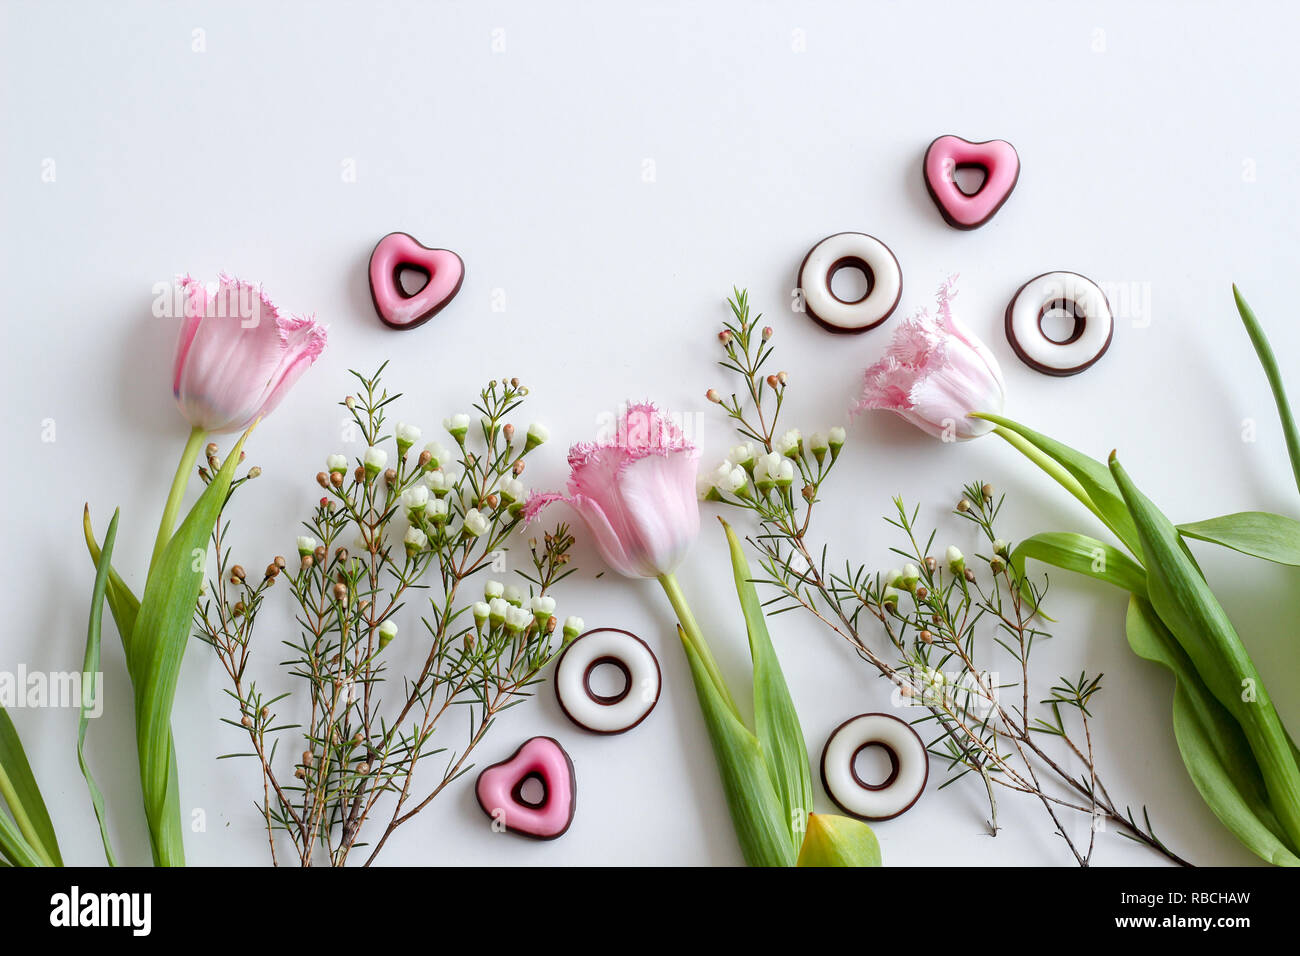 Spring floral flat lay with pink tulips and heart shaped sweets Stock Photo